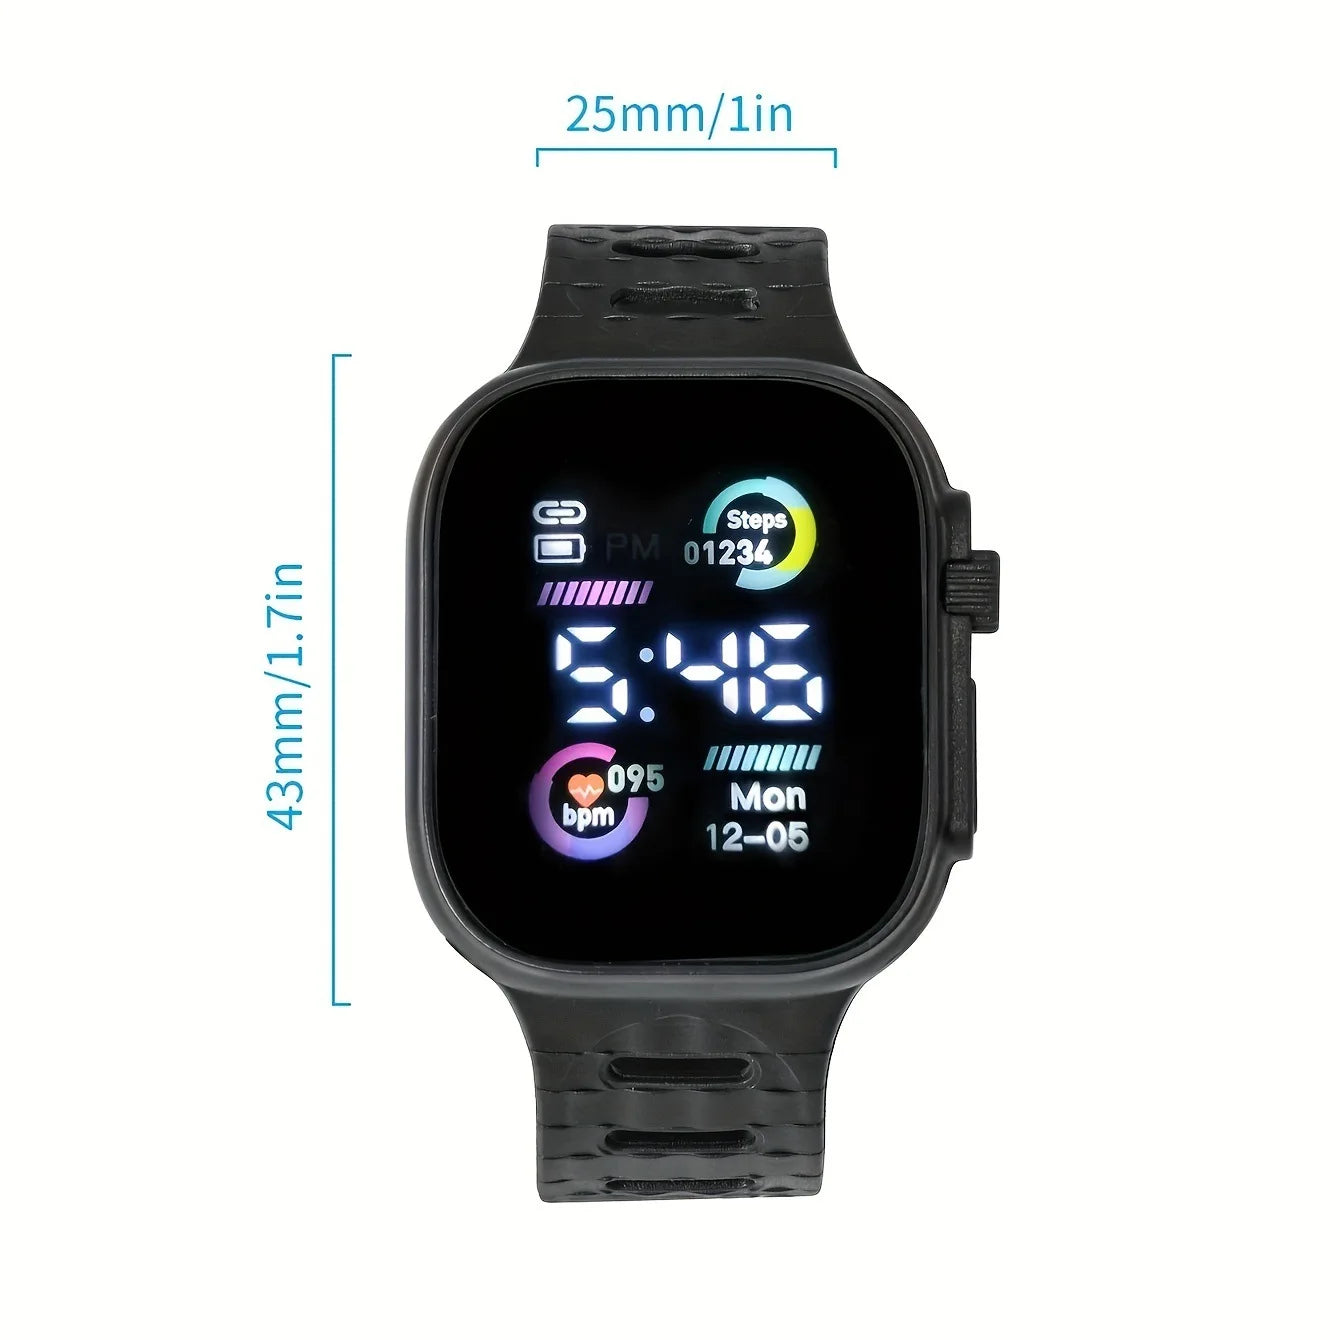 Led Display Digital Kids Watches Sport Boys Girls Luminous Children’s Electronic Wristwatch Students Clock Watches Relojes Mujer